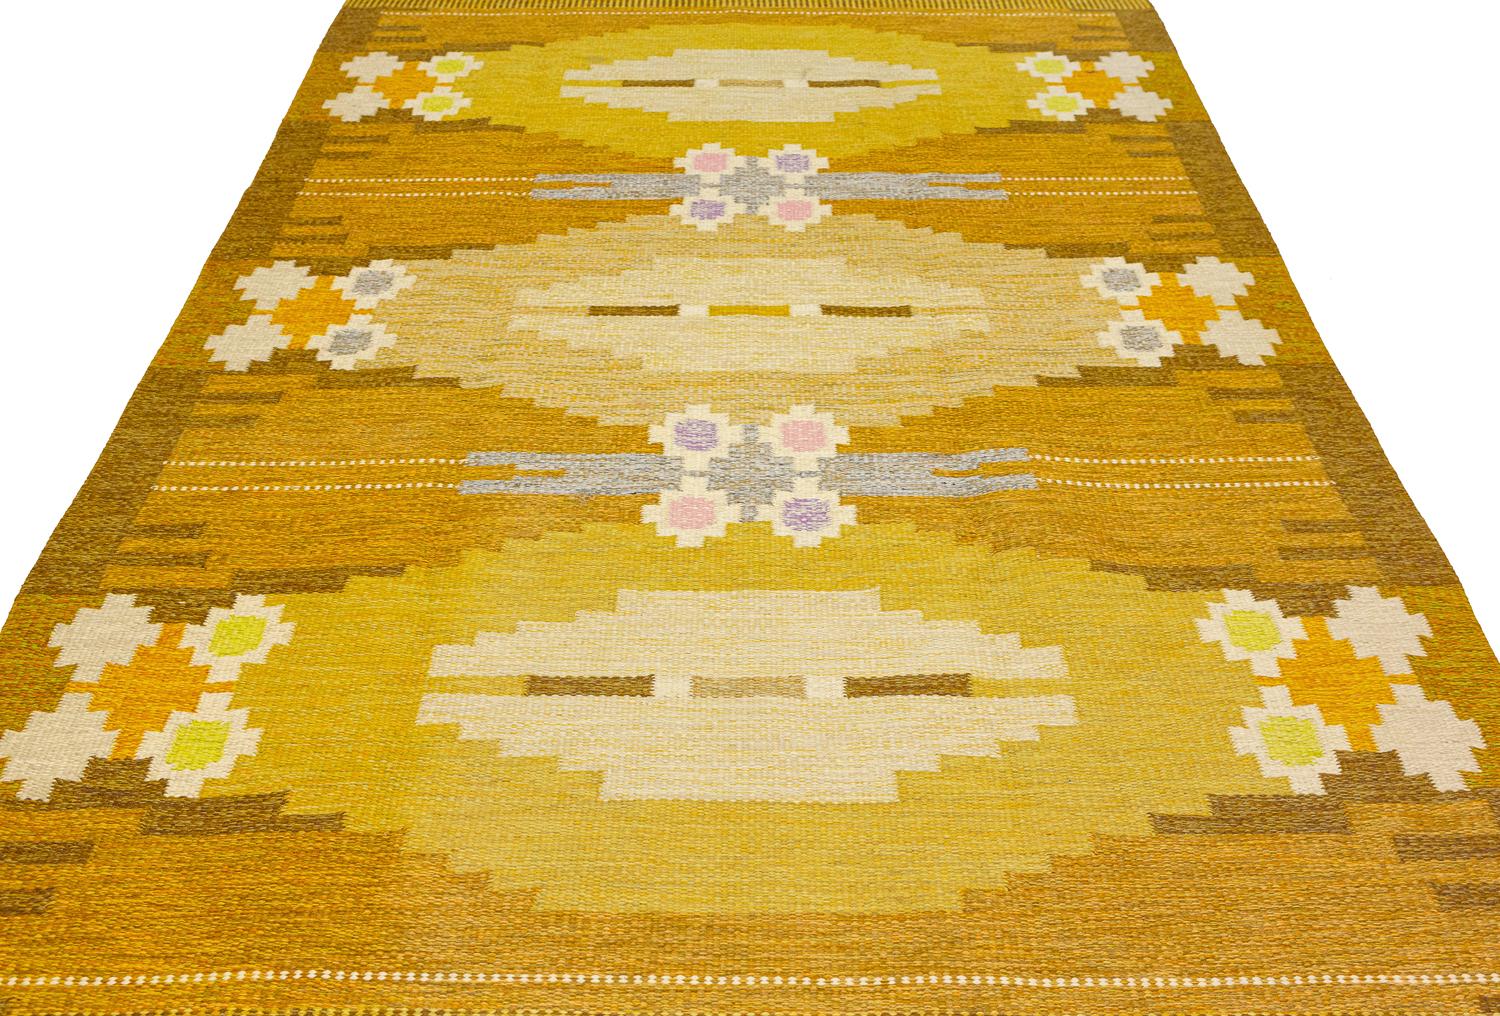 This is a semi-antique Swedish kilim woven circa 1950 and it measures 235 X 162 cm. The design of this kilim is attributed to Ingegerd Silow, one of the most influential designers in the golden period of Scandinavian design. This fabulous kilim is a